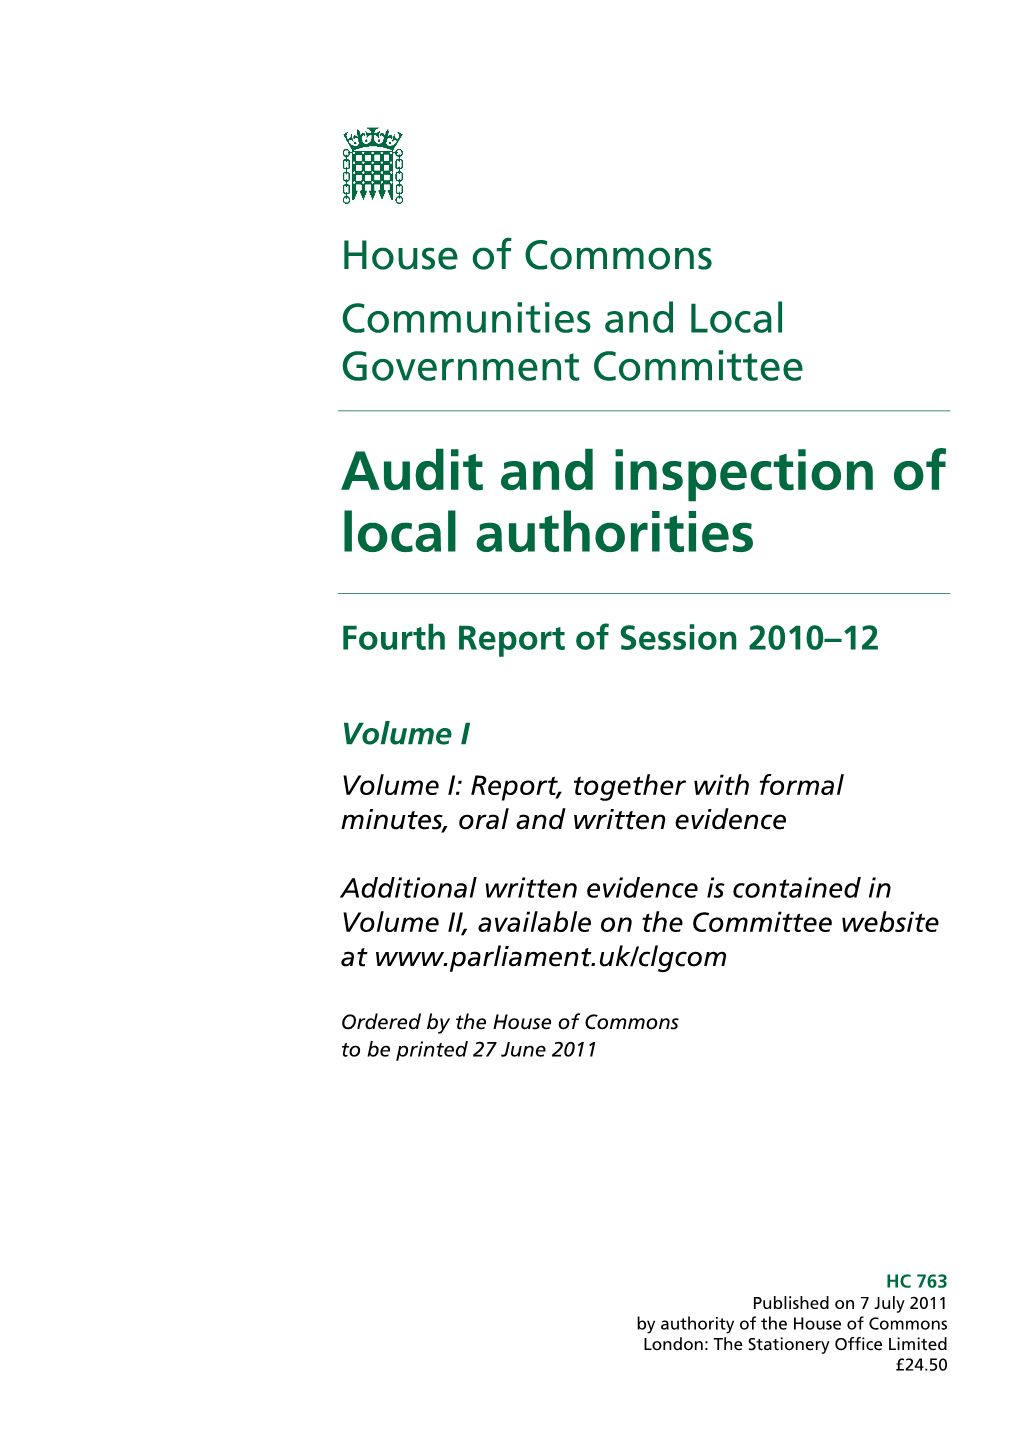 Audit and Inspection of Local Authorities